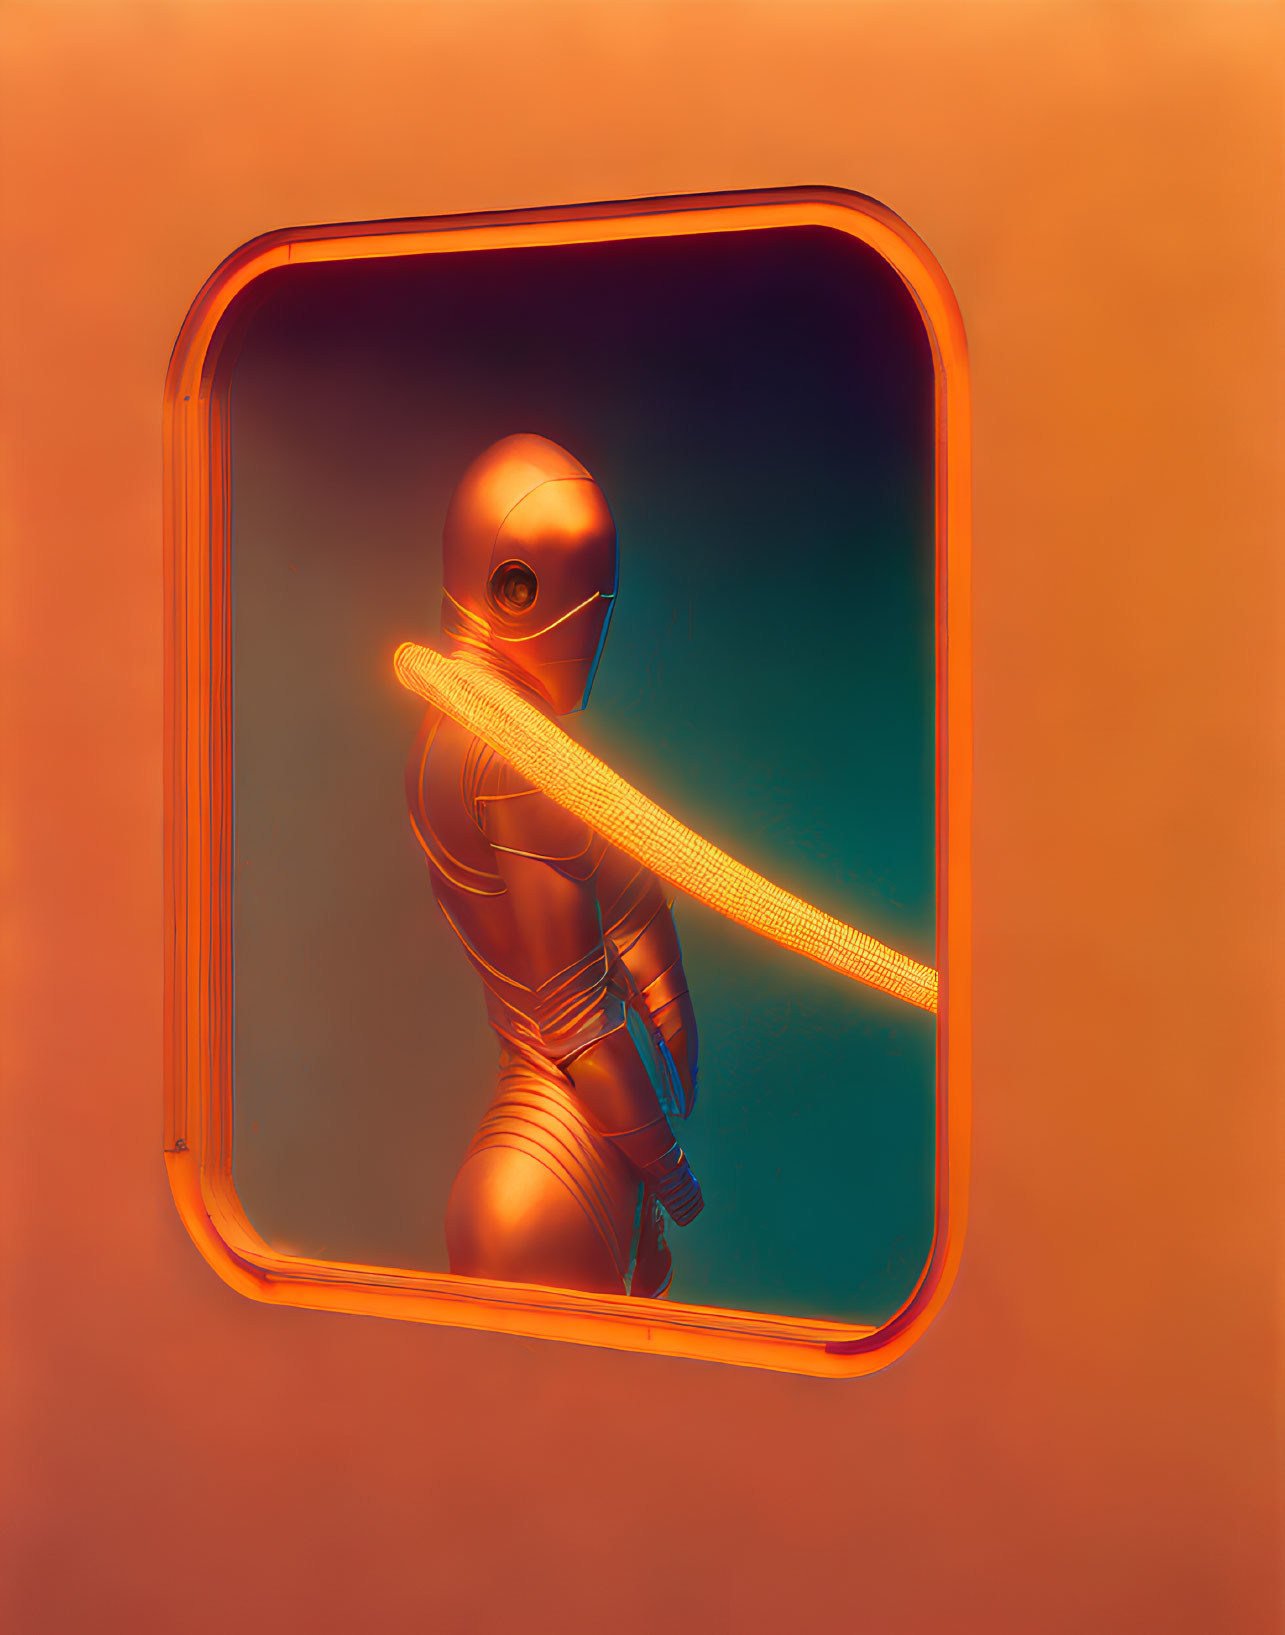 Astronaut in reflective orange suit touching glowing light ribbon in rounded square portal